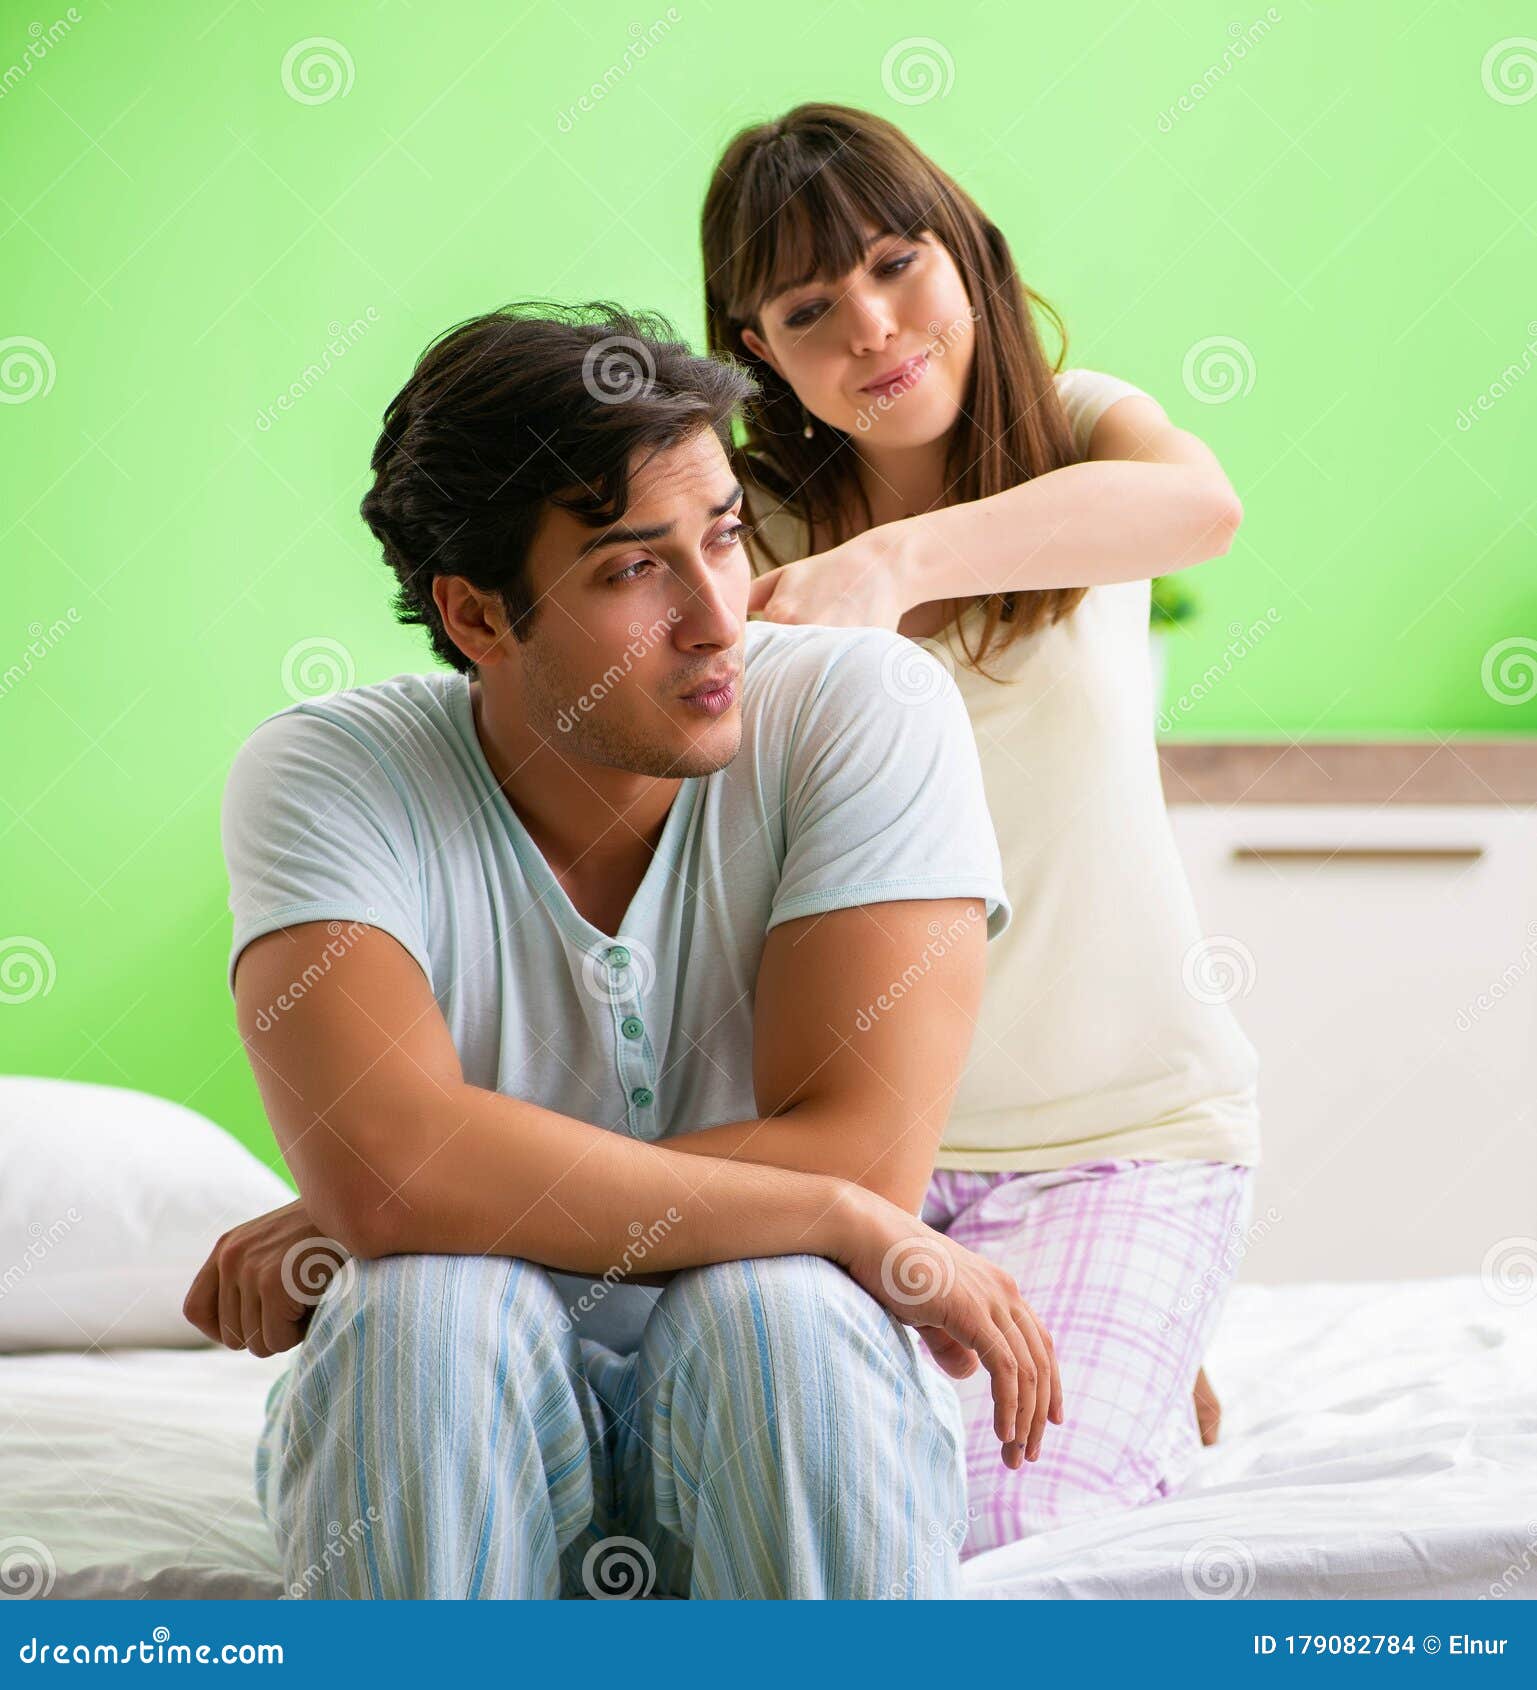 Woman Doing Massage To Her Husband in Bedroom Stock Photo pic image